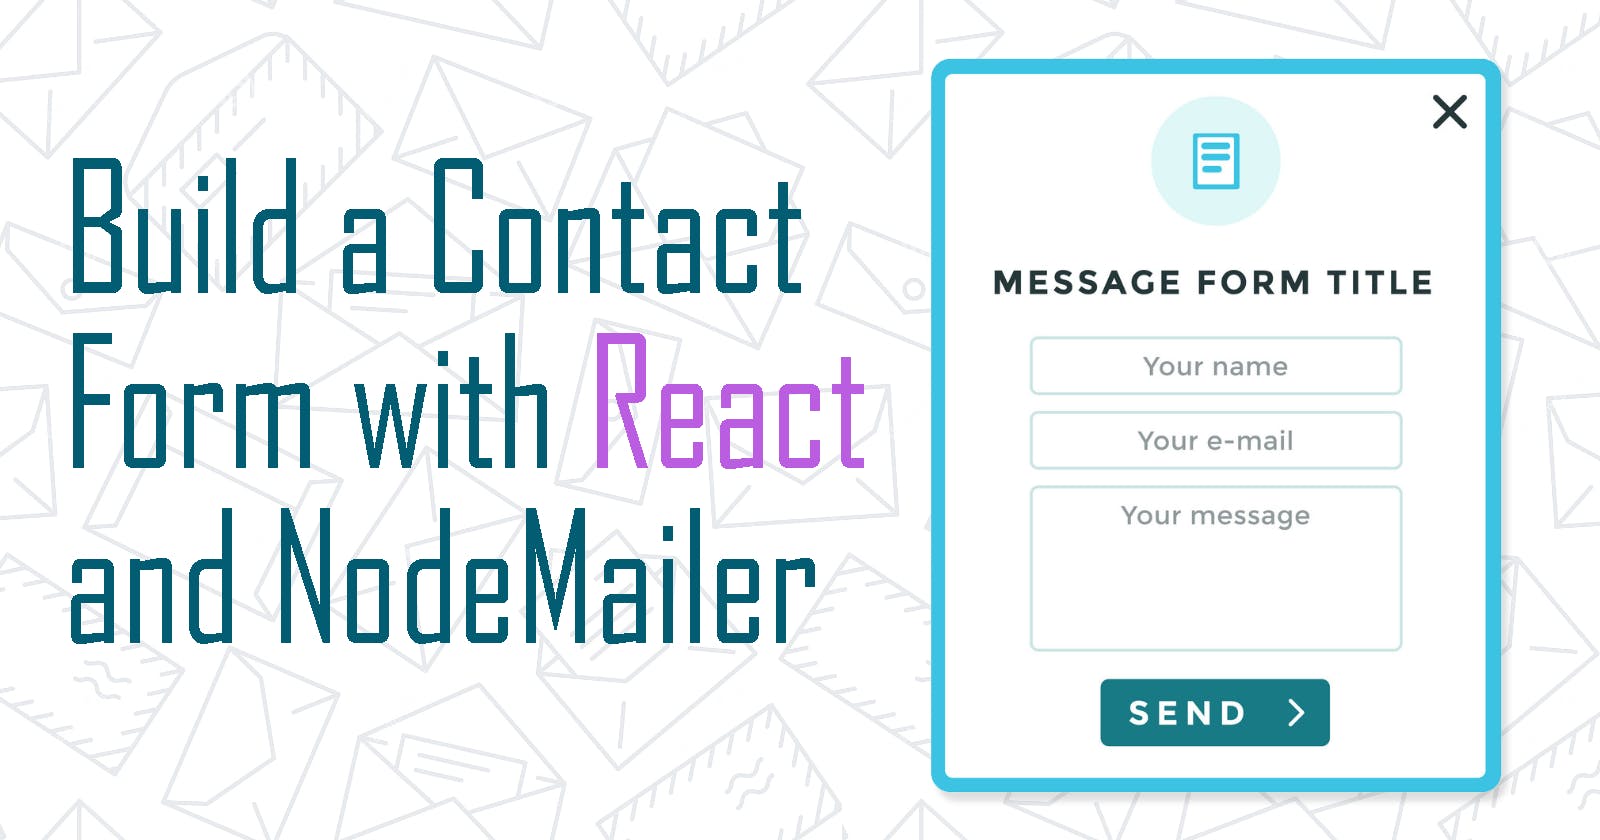 Build a Contact Form with React and Nodemailer